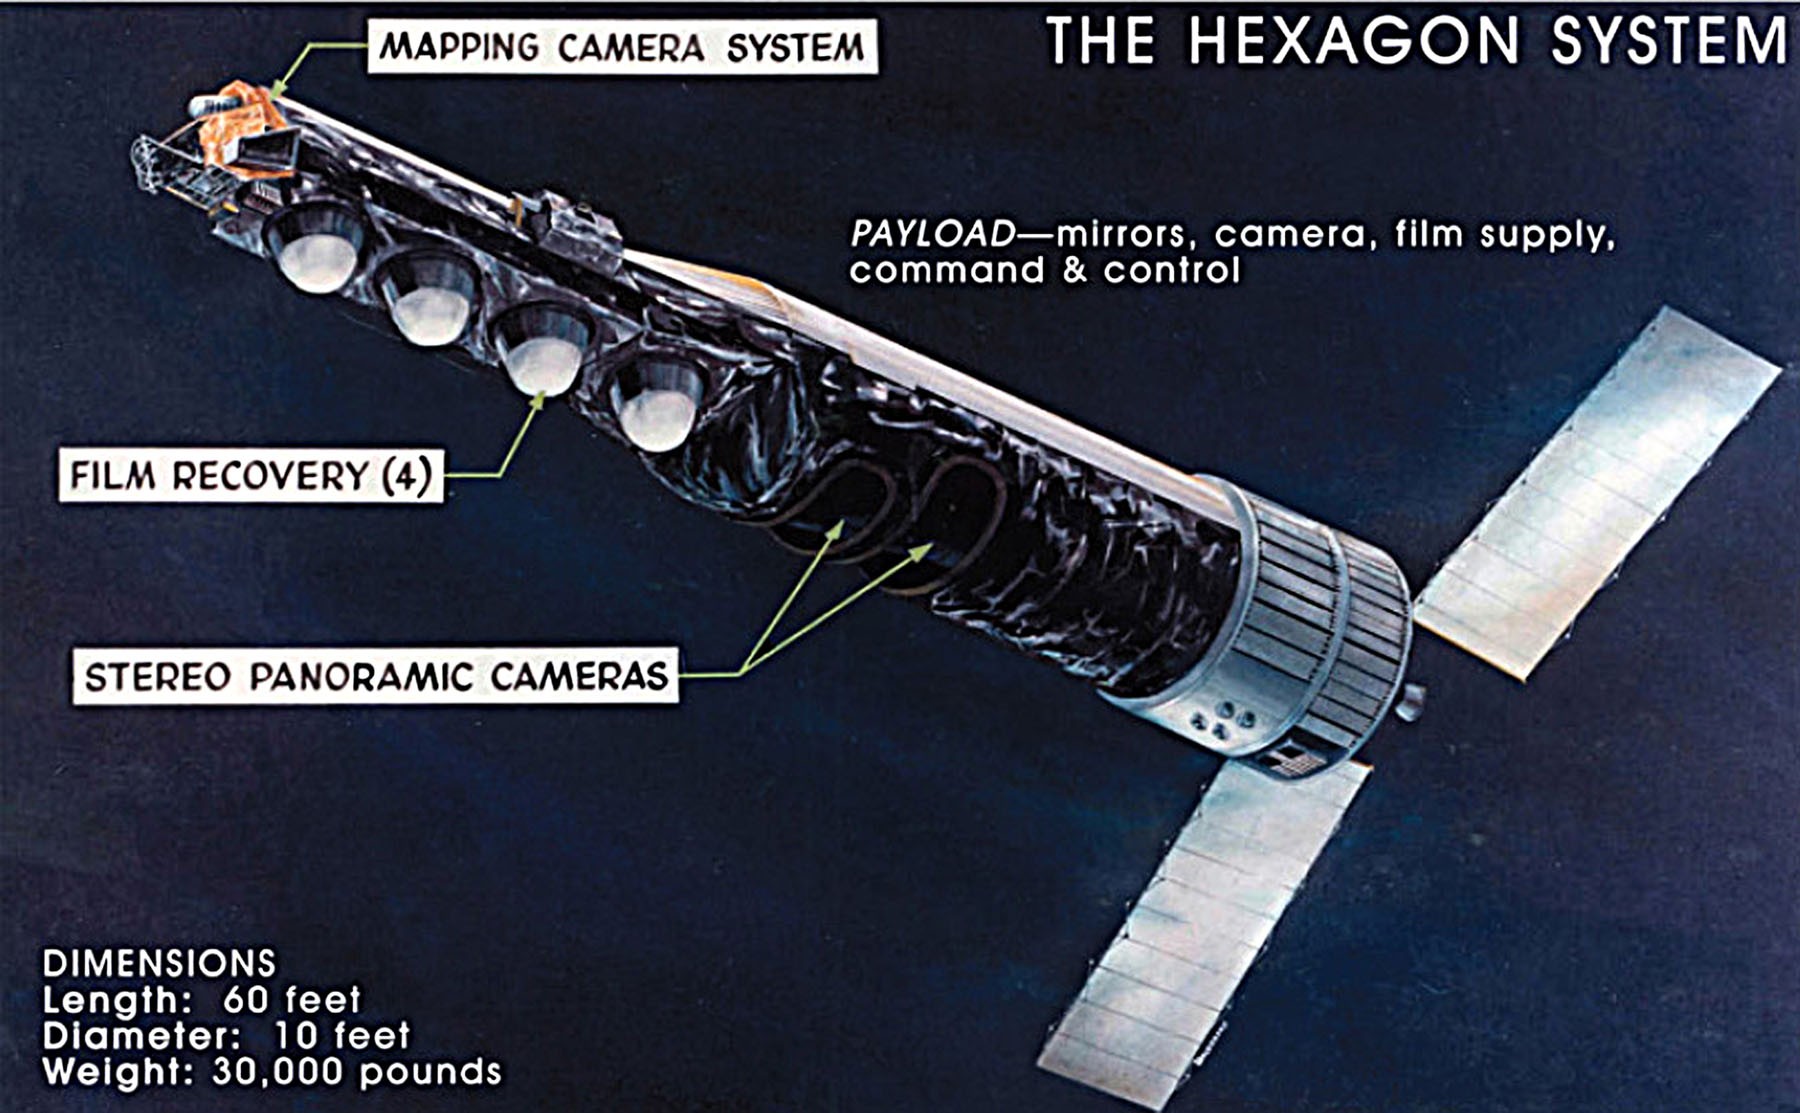 a diagram showing the interior of a long metal tube in space, containing cameras and rocket engines